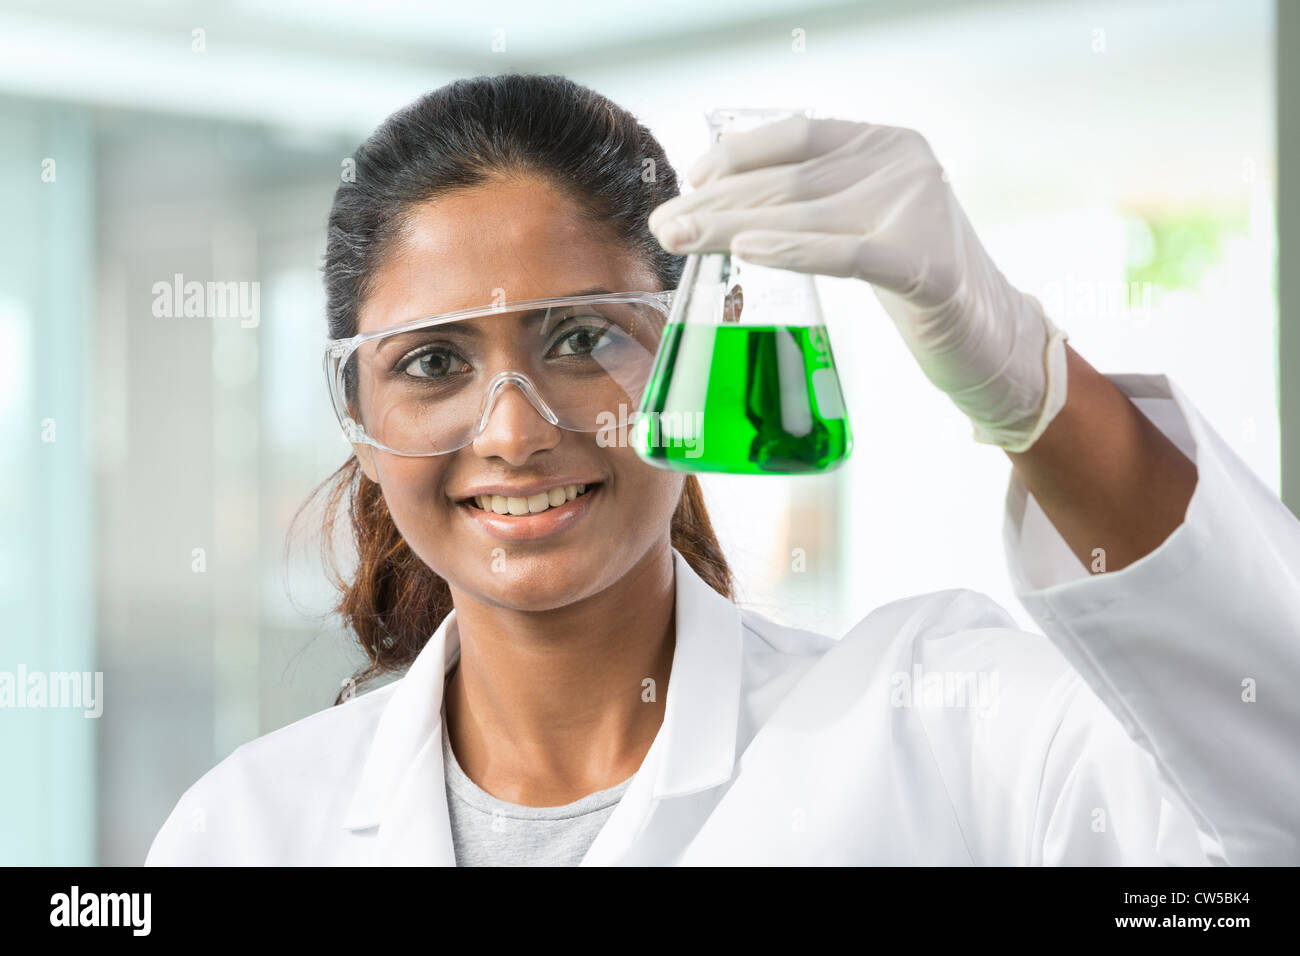 Woman scientist analyzing a solution. Stock Photo